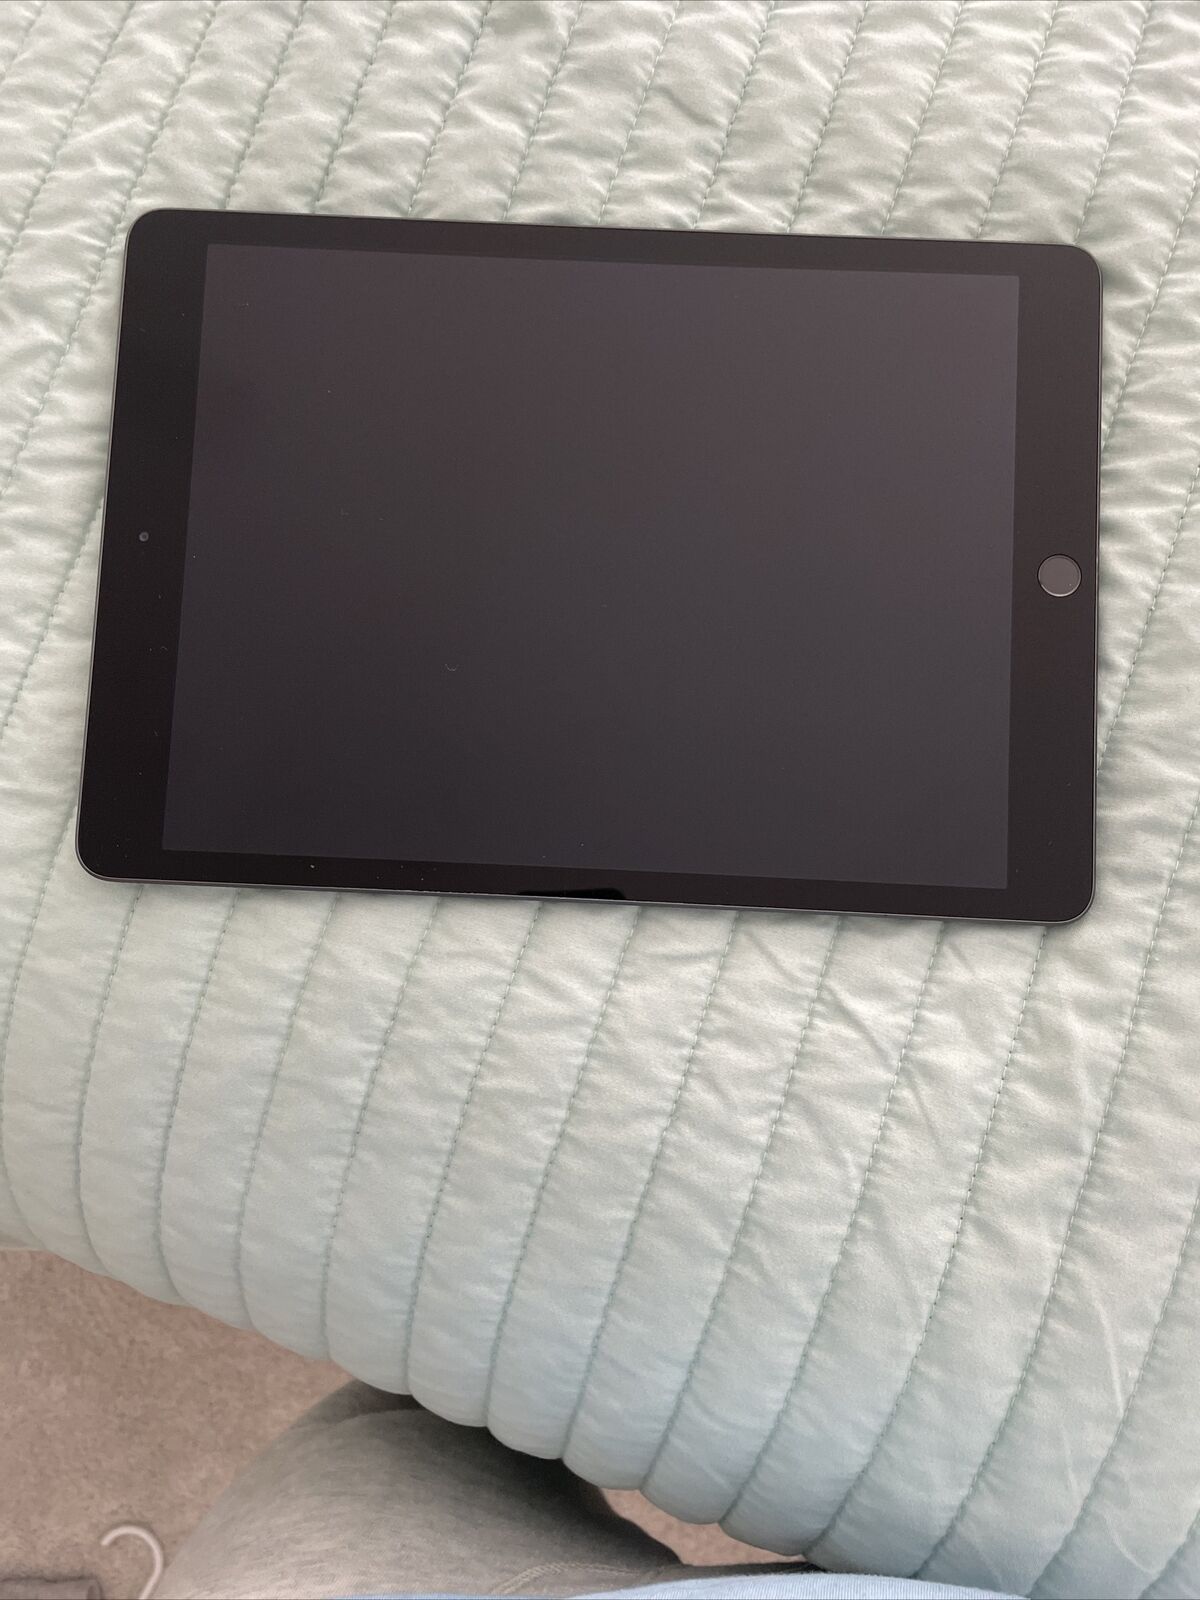 Apple iPad 7th Gen. 32GB, Wi-Fi, 10.2 in - Space Gray MeSSAGE ME BEFORE BUY